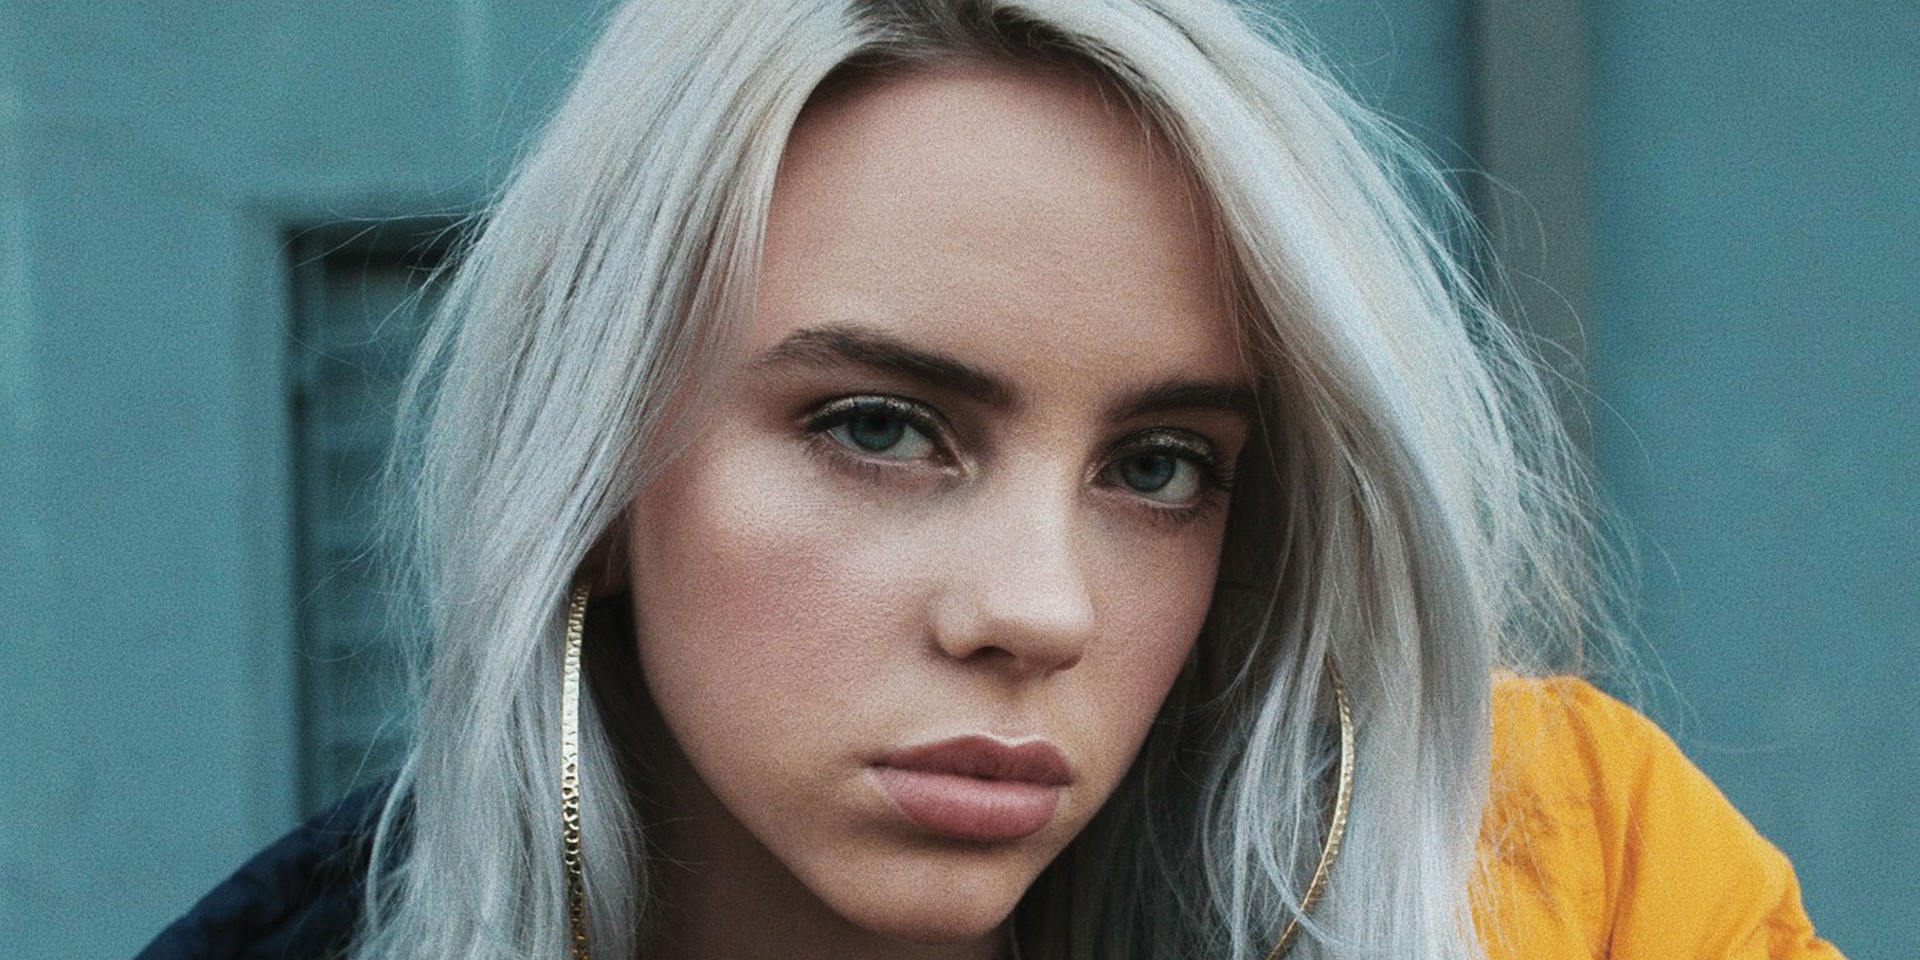 Billie Eilish: "Songwriting doesn’t always have to be things you’ve experienced yourself"